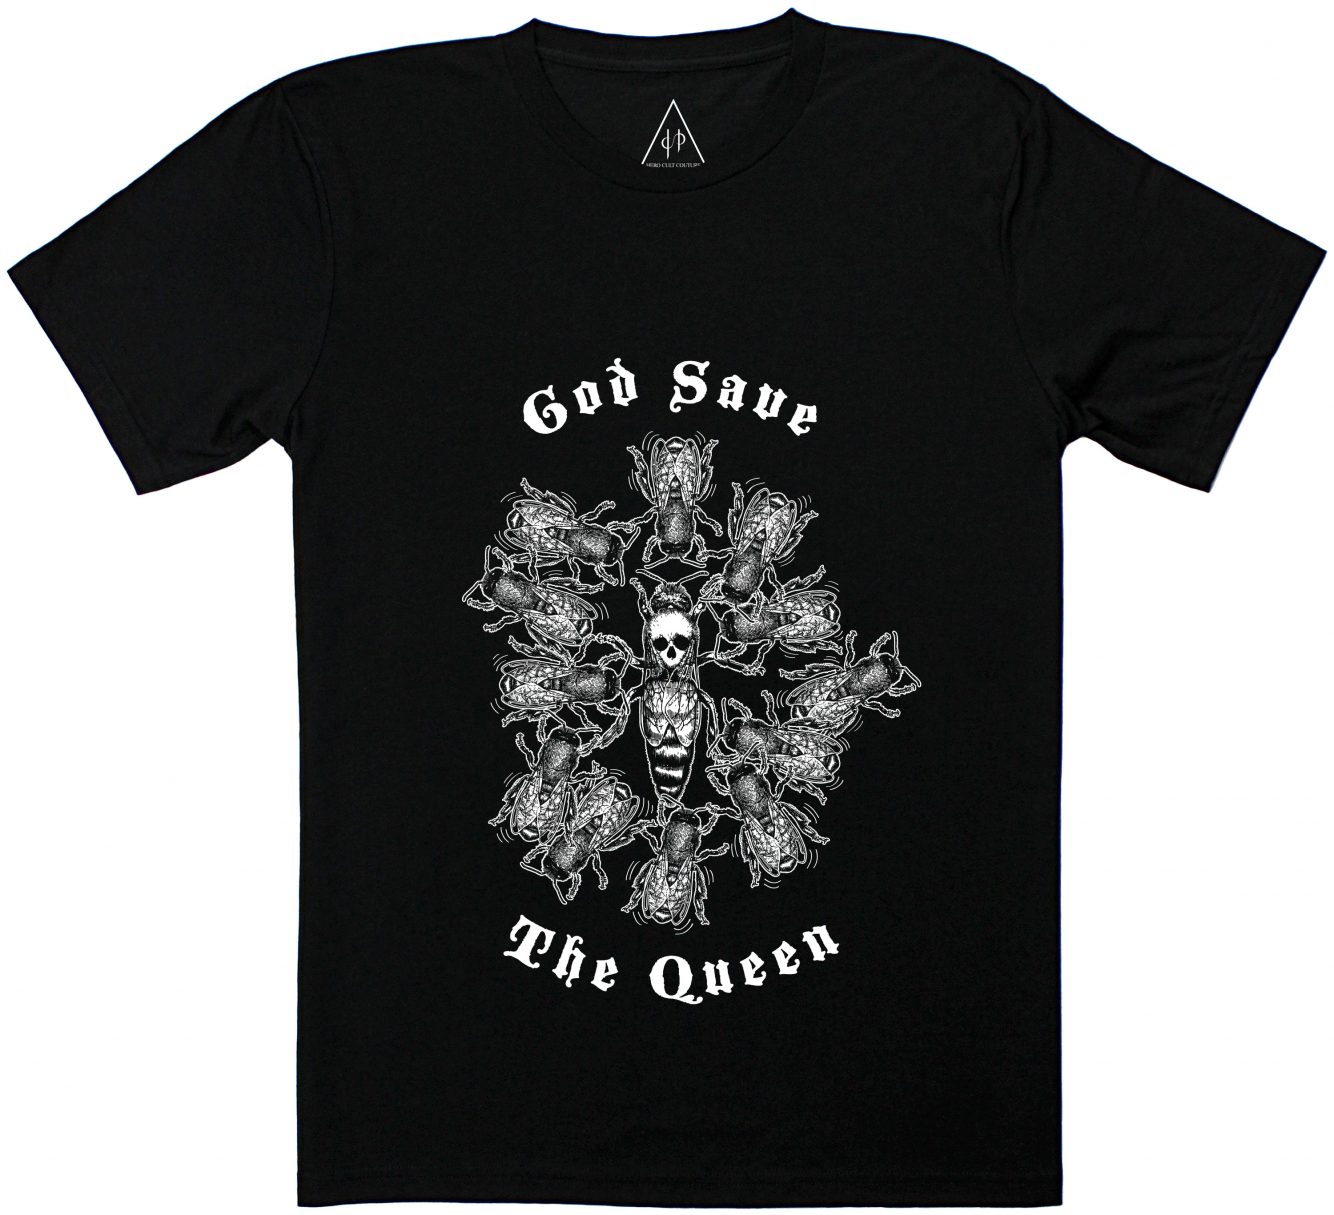 God Save The Queen T-Shirt | HERO CULT COUTURE